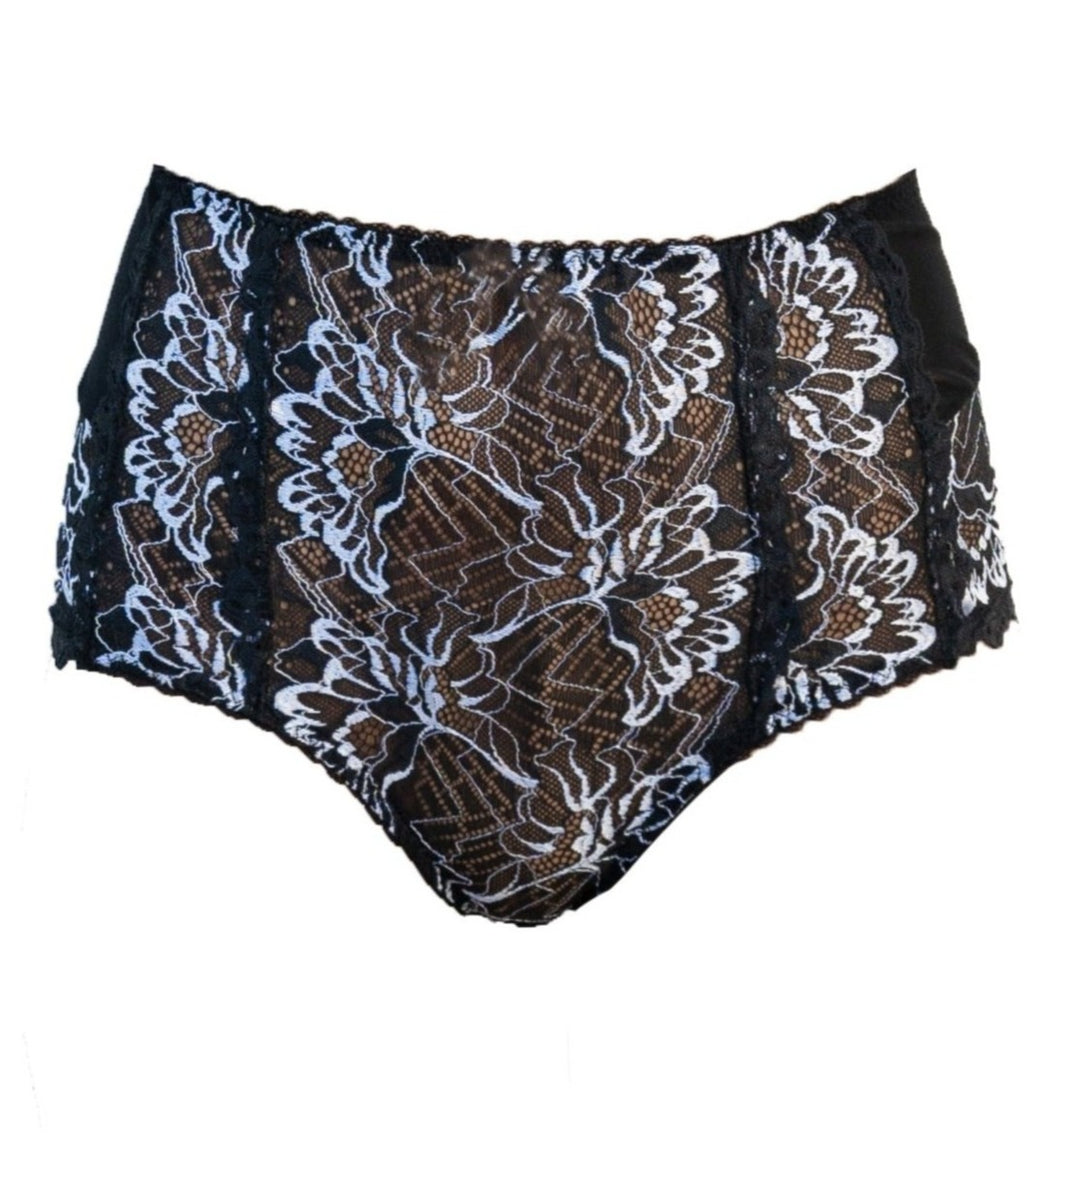 Kyoto Tulle and Lace High-waisted Brazilian Panty